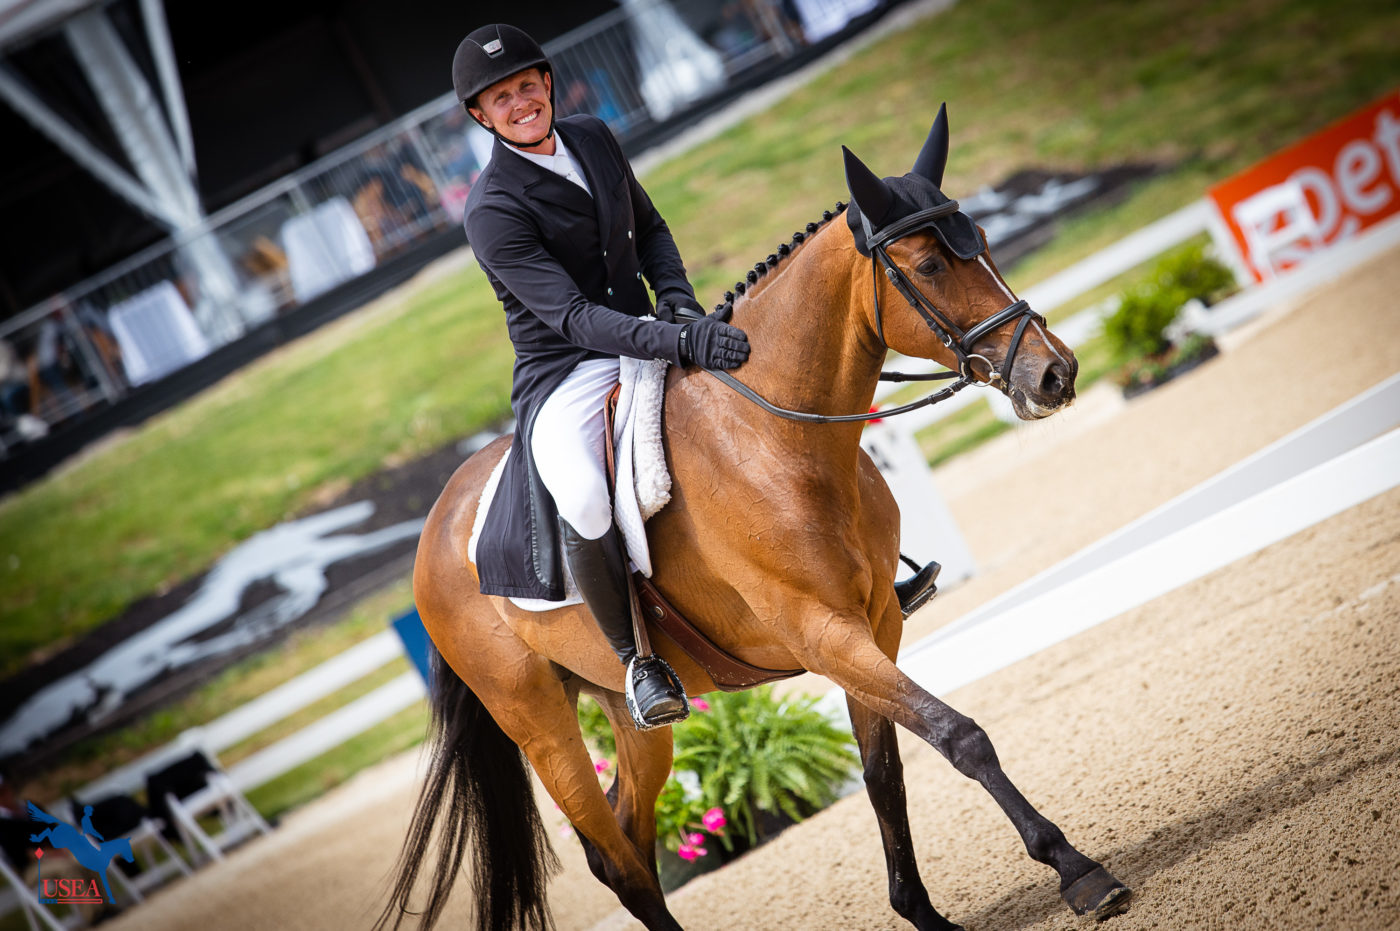 Bobby Meyerhoff flashed a quick smile to the camera following his dressage test. USEA/ Meagan DeLisle